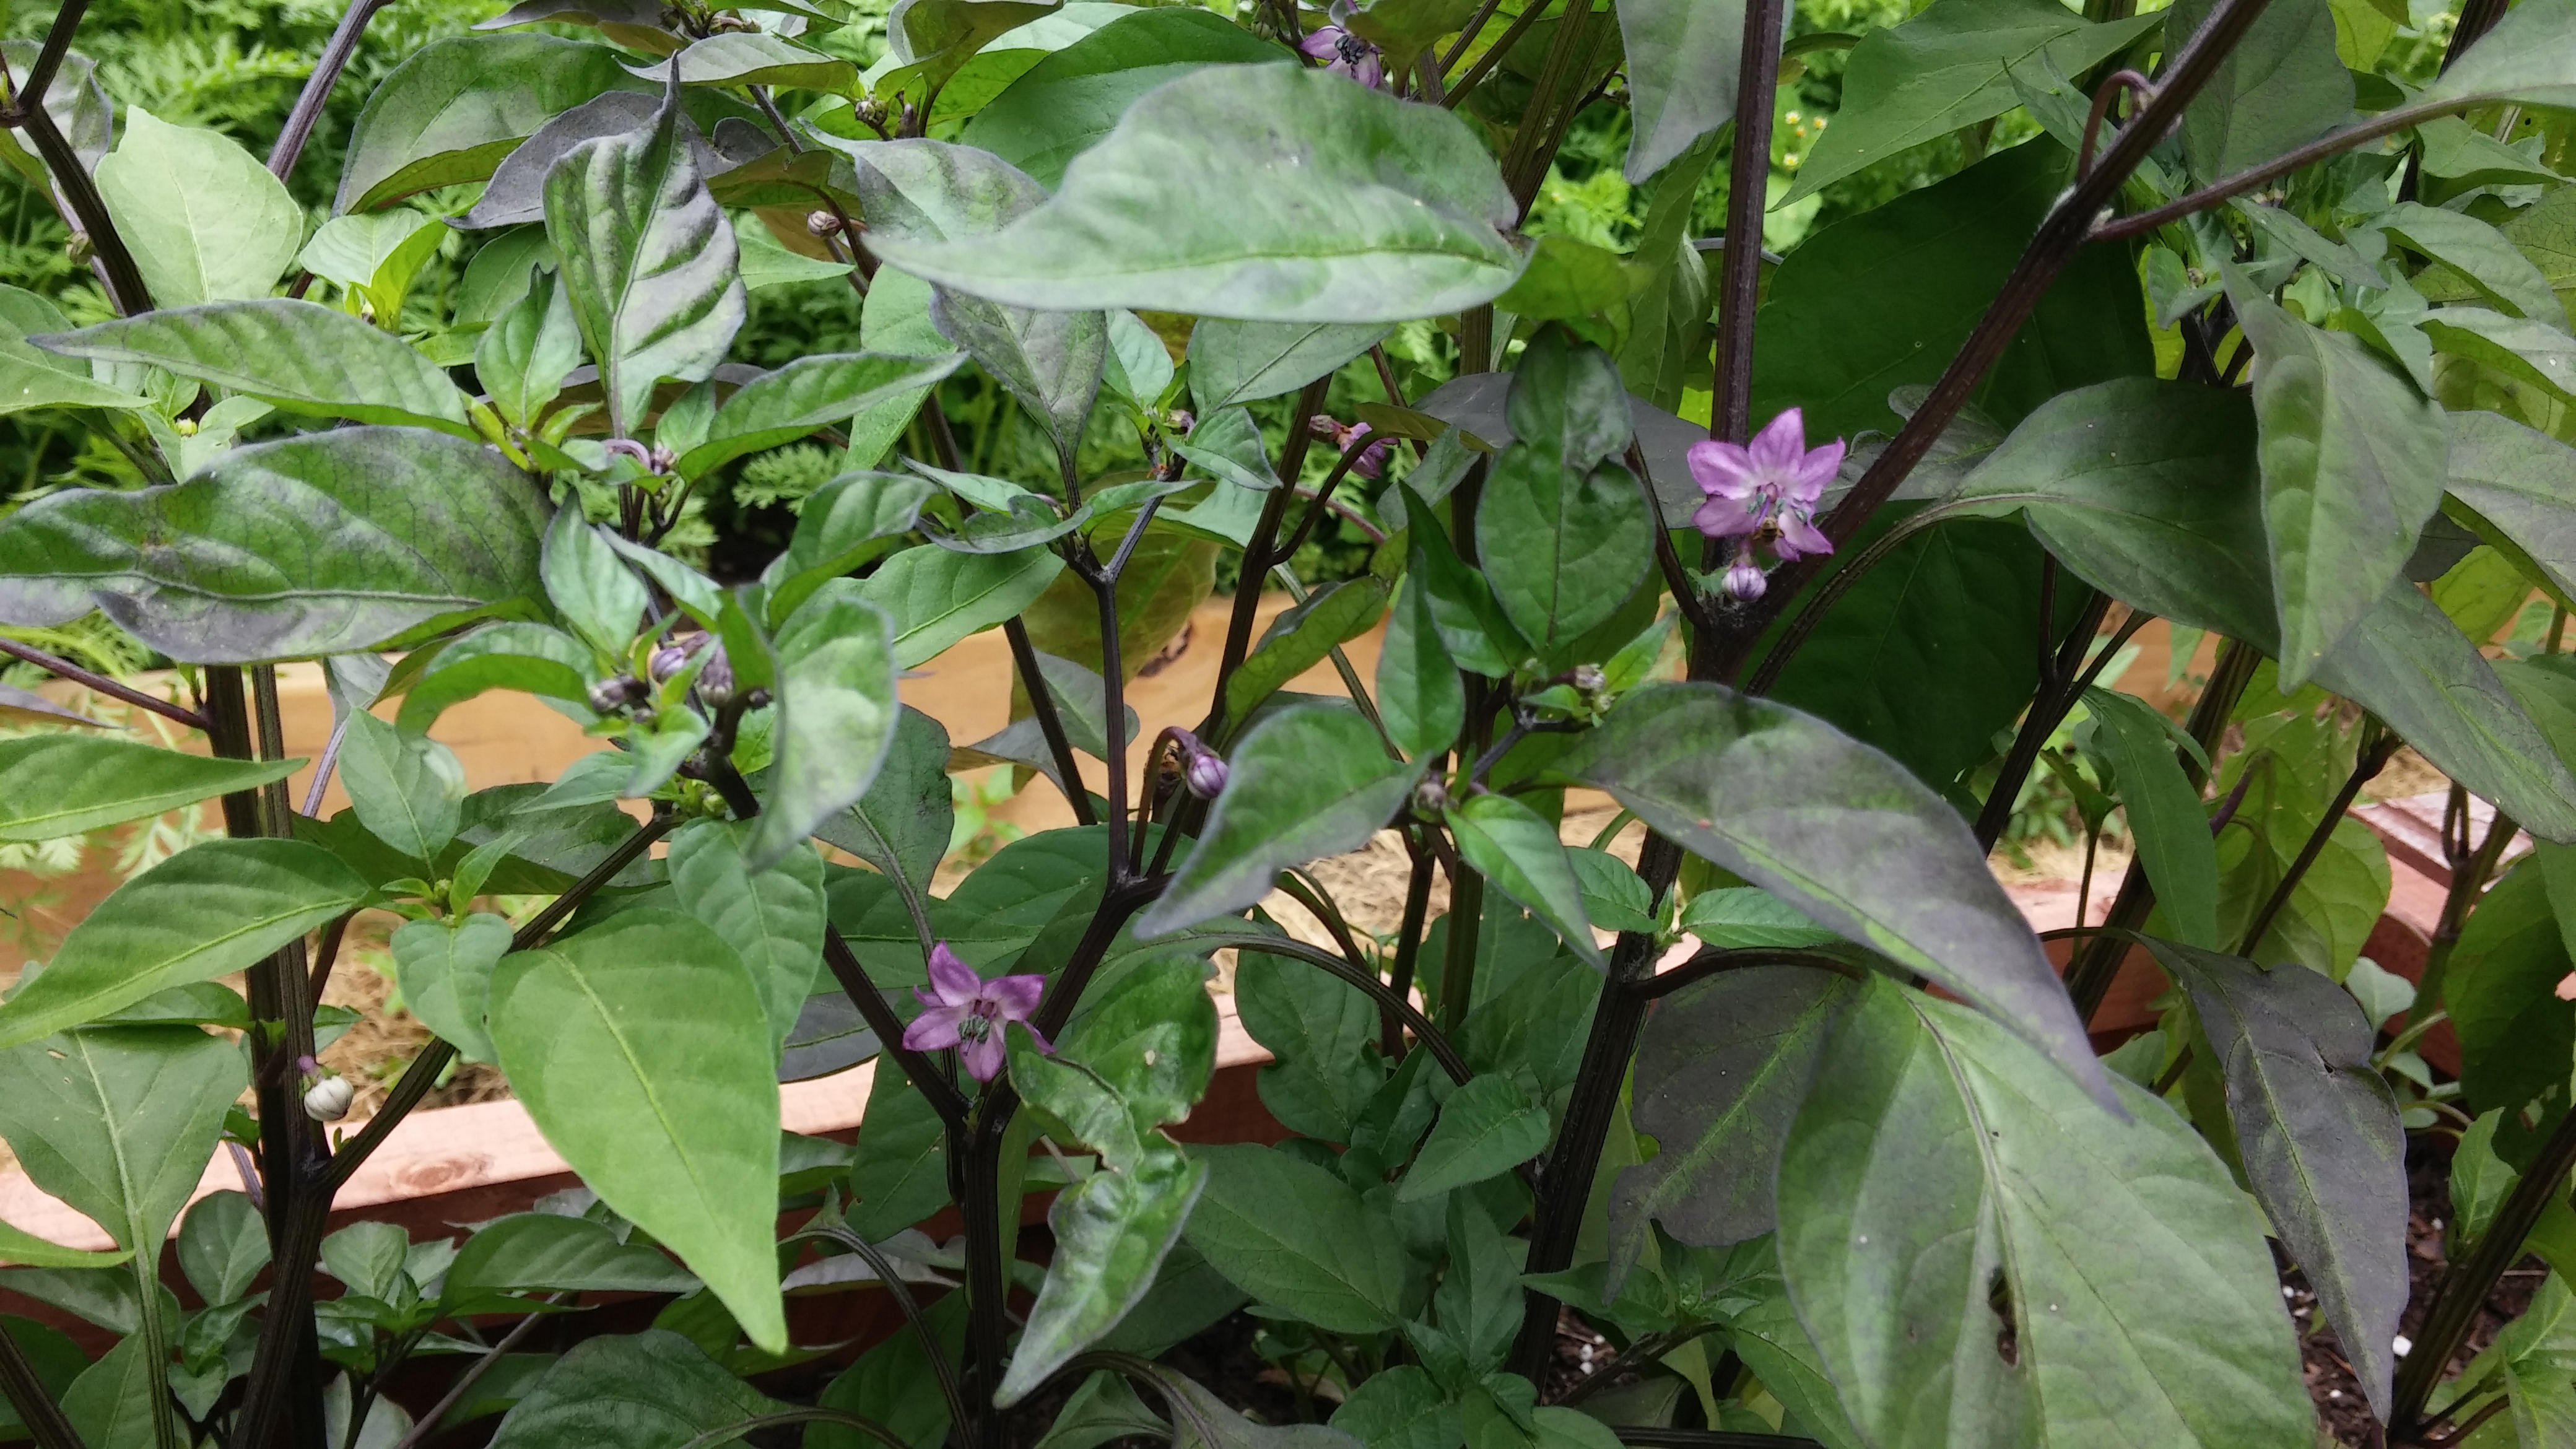 Purple leaves and purple flowers will soon lead to purple peppers